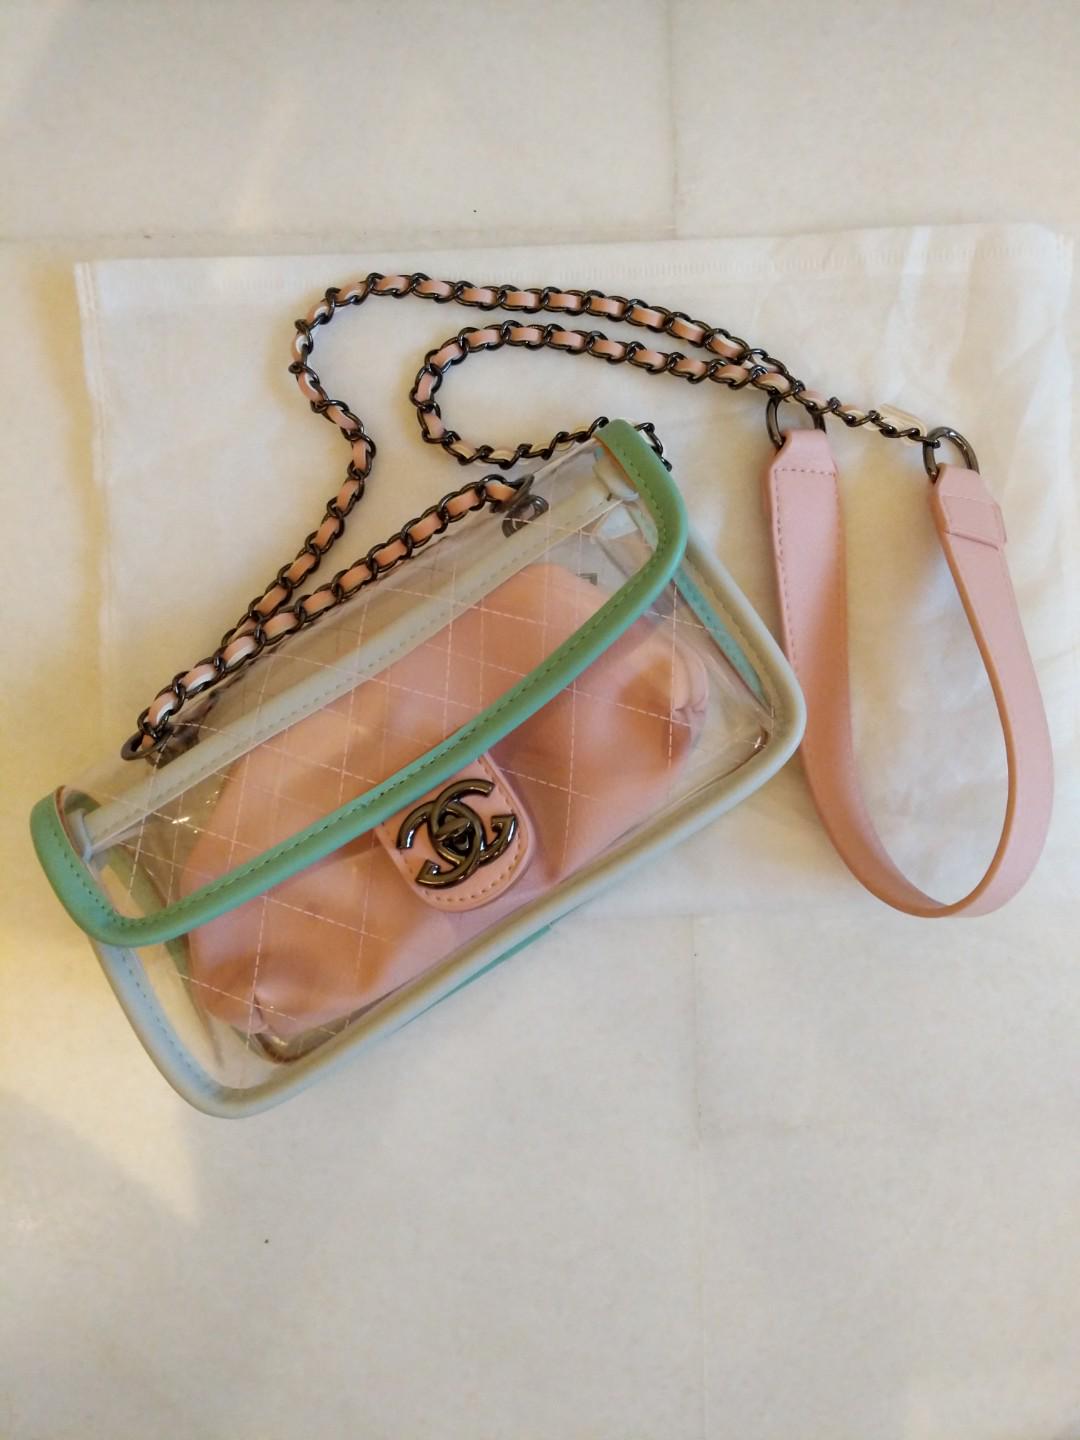 New Clear Chanel inspired jelly bag with dust bag